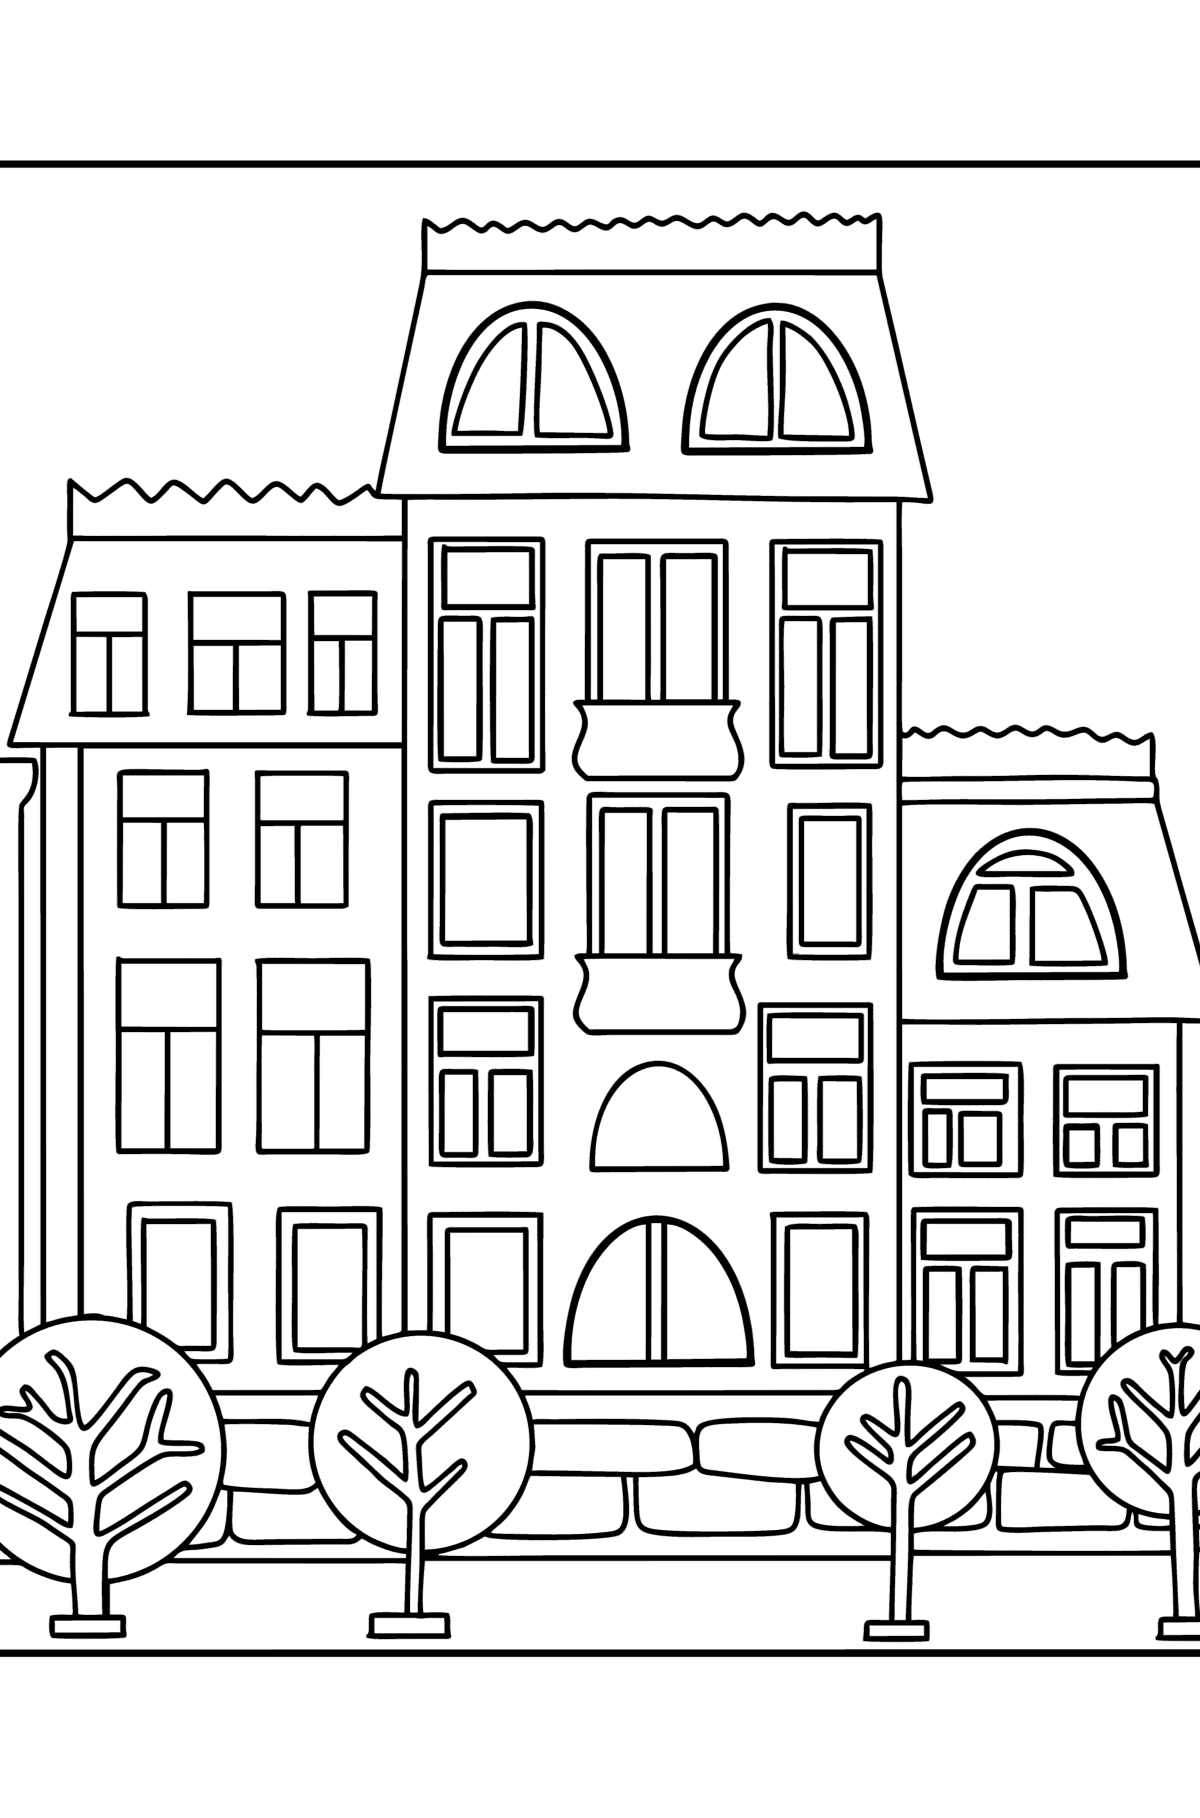 Multi-storey building coloring page - Coloring Pages for Kids